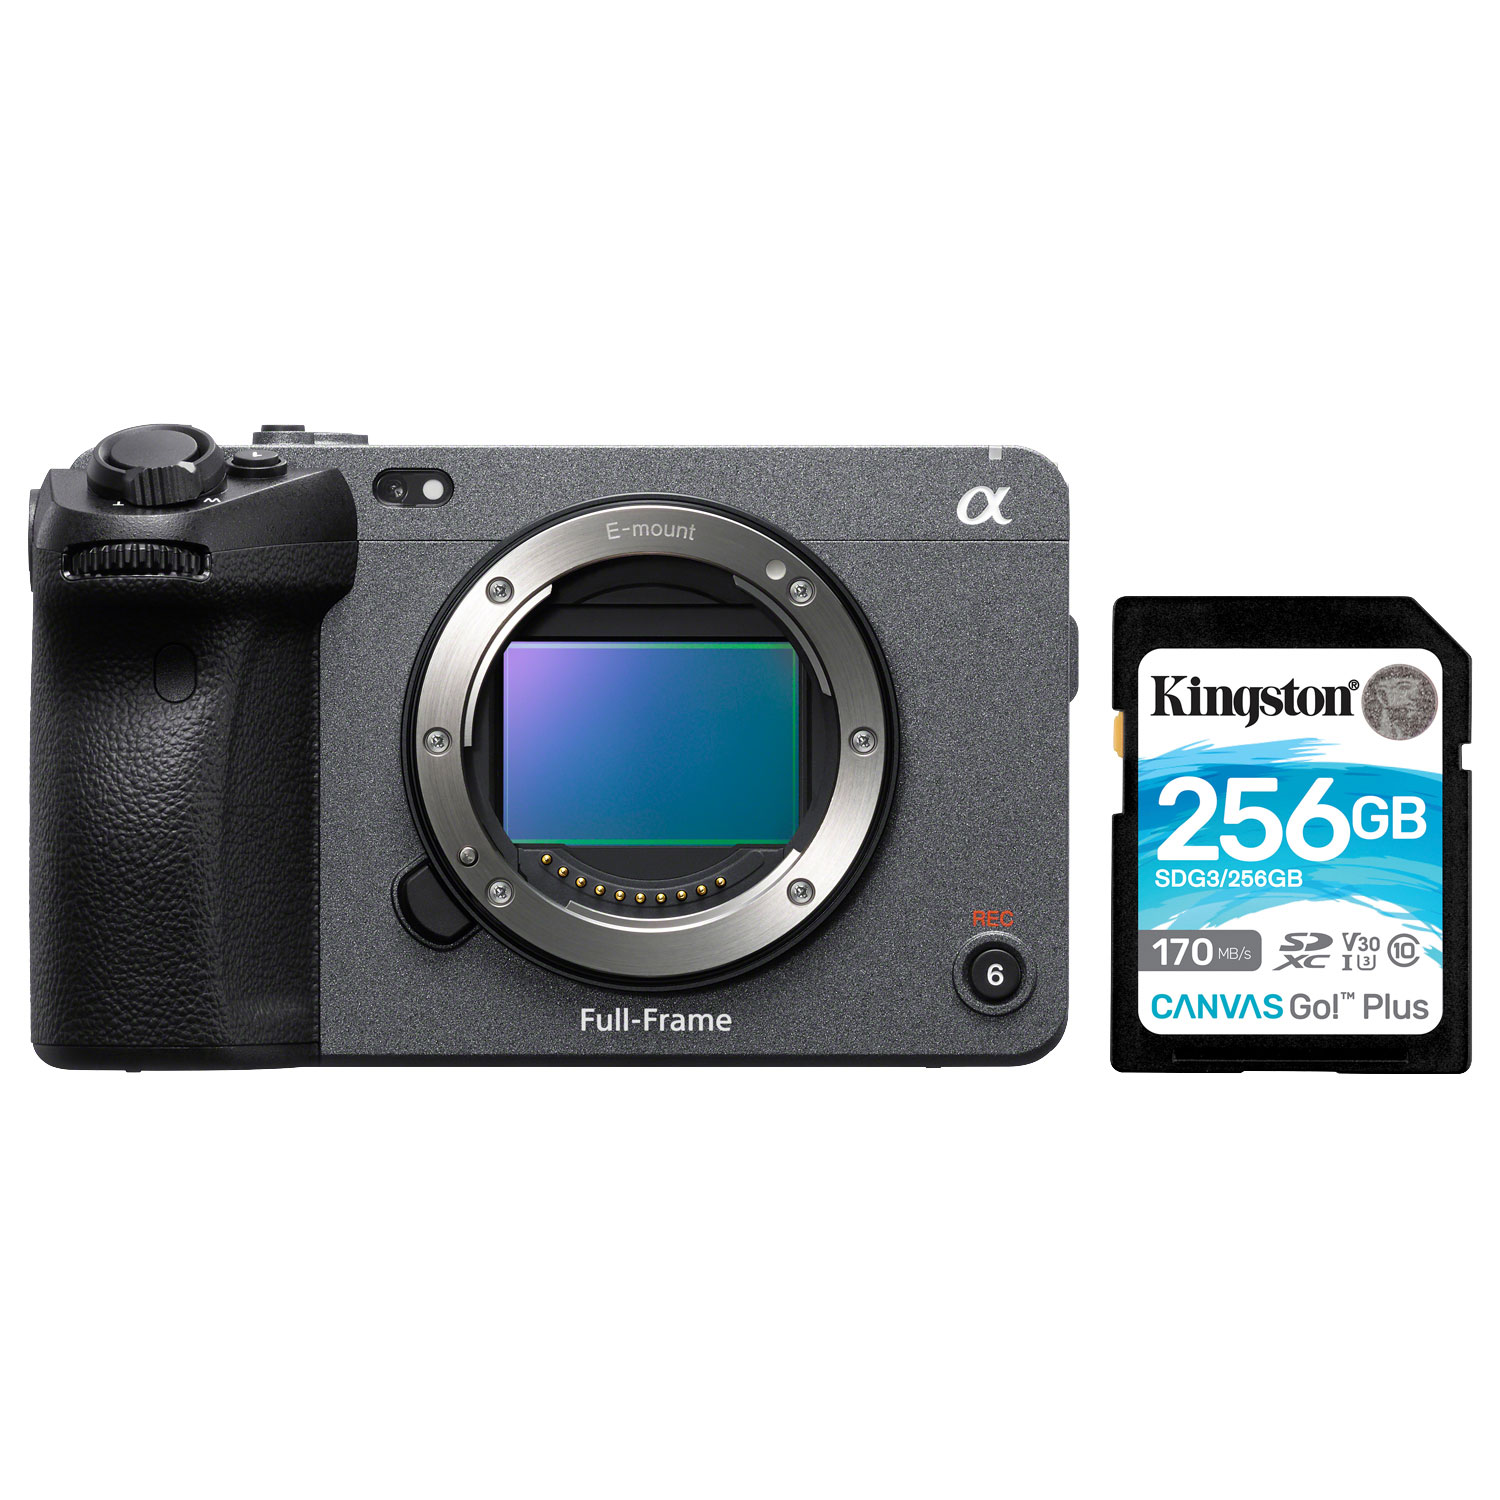 Sony Alpha FX3 Cinema Line Full-Frame Mirrorless Camera (Body Only) with 256GB Memory Card